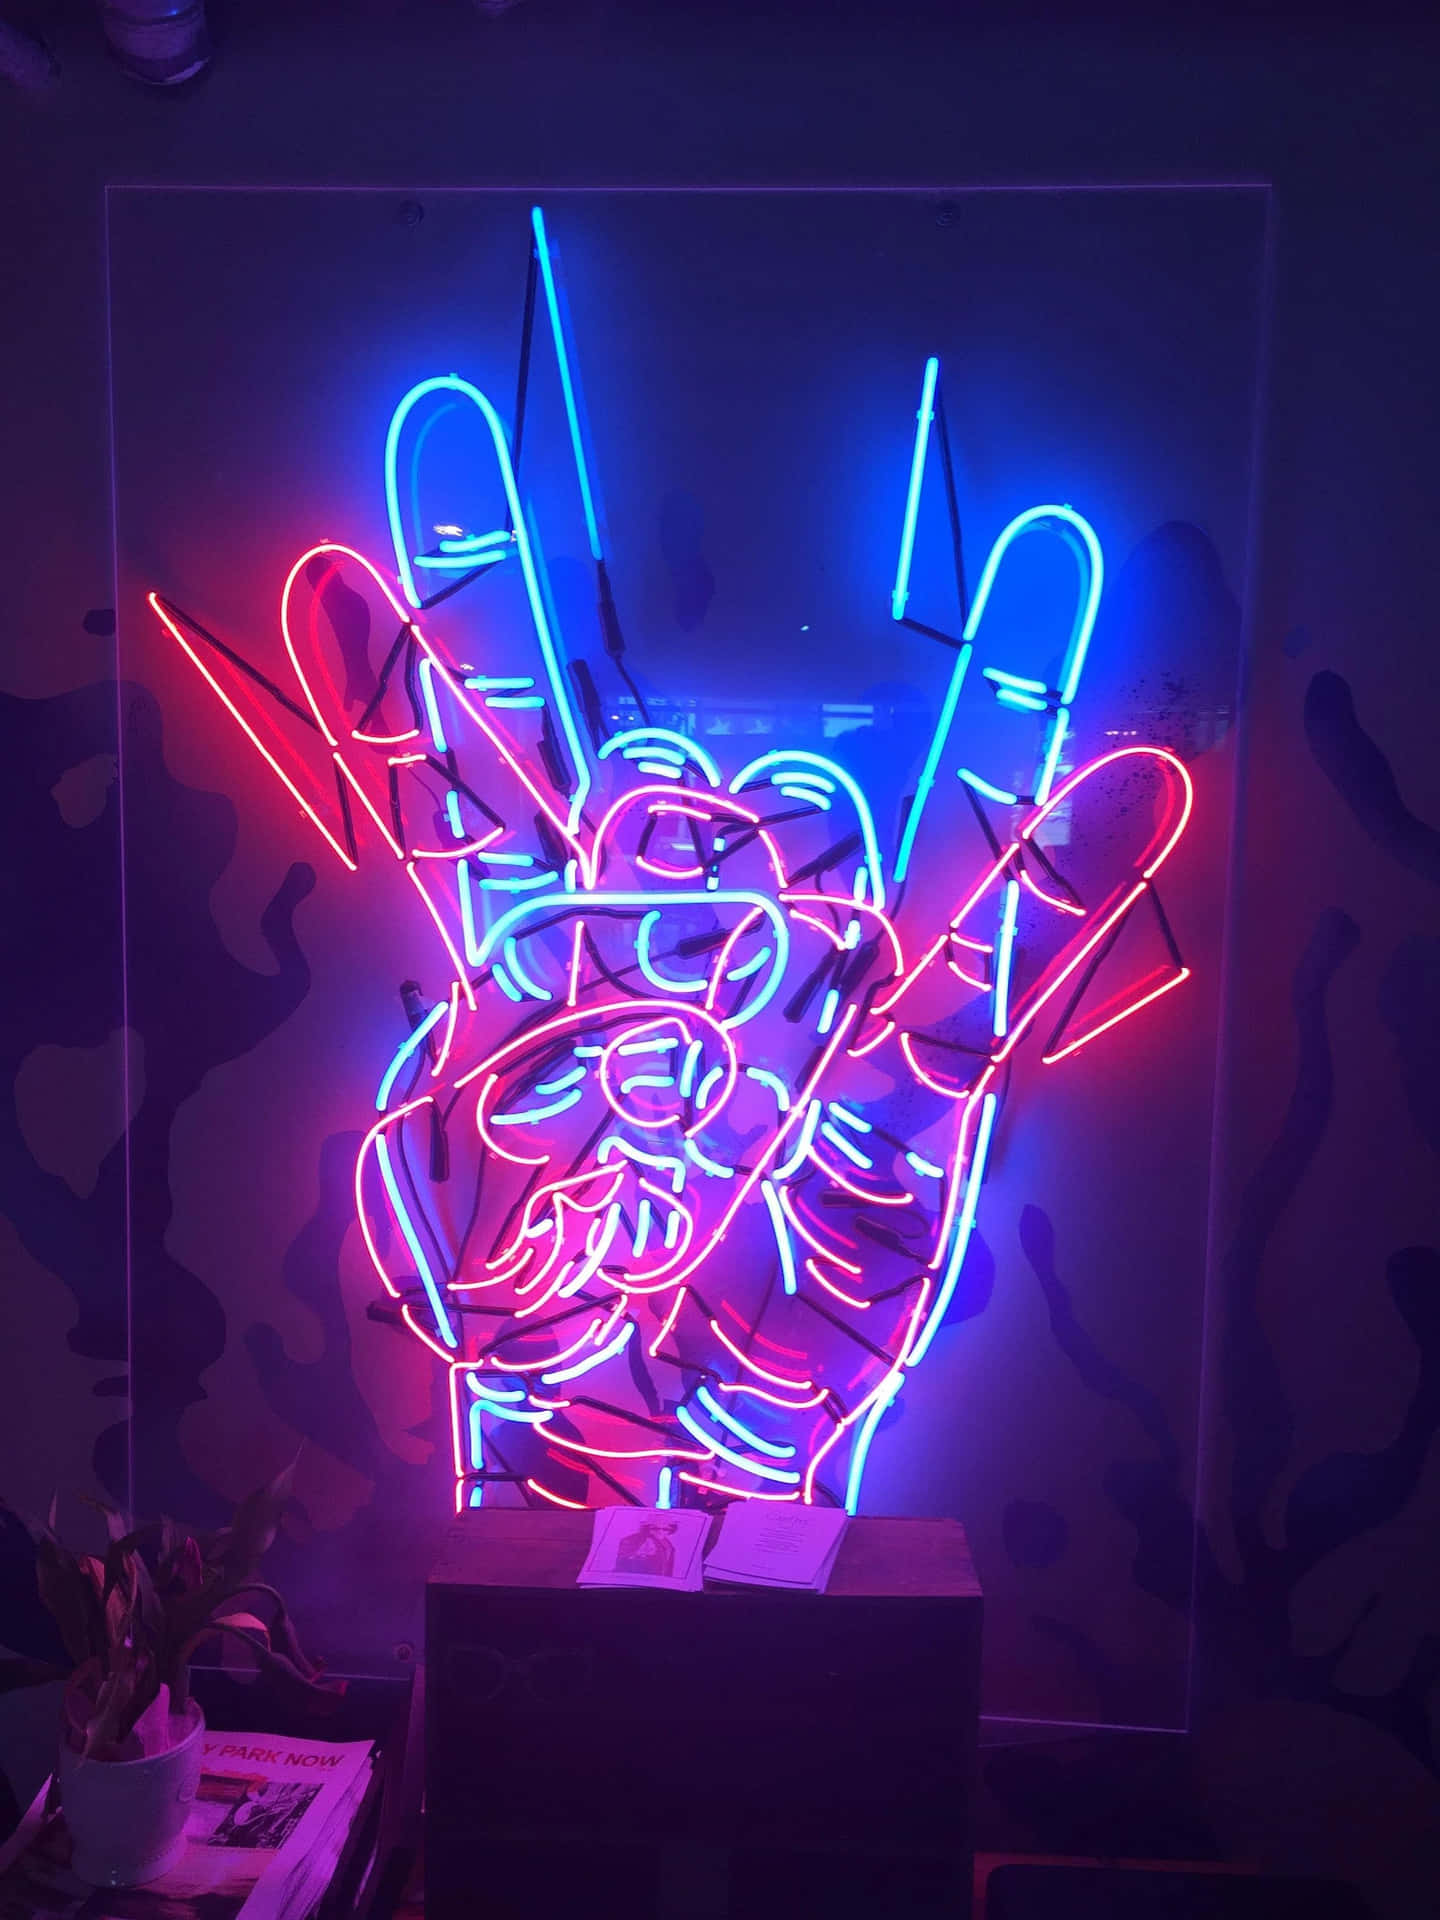 A Neon Sign With A Hand In The Middle